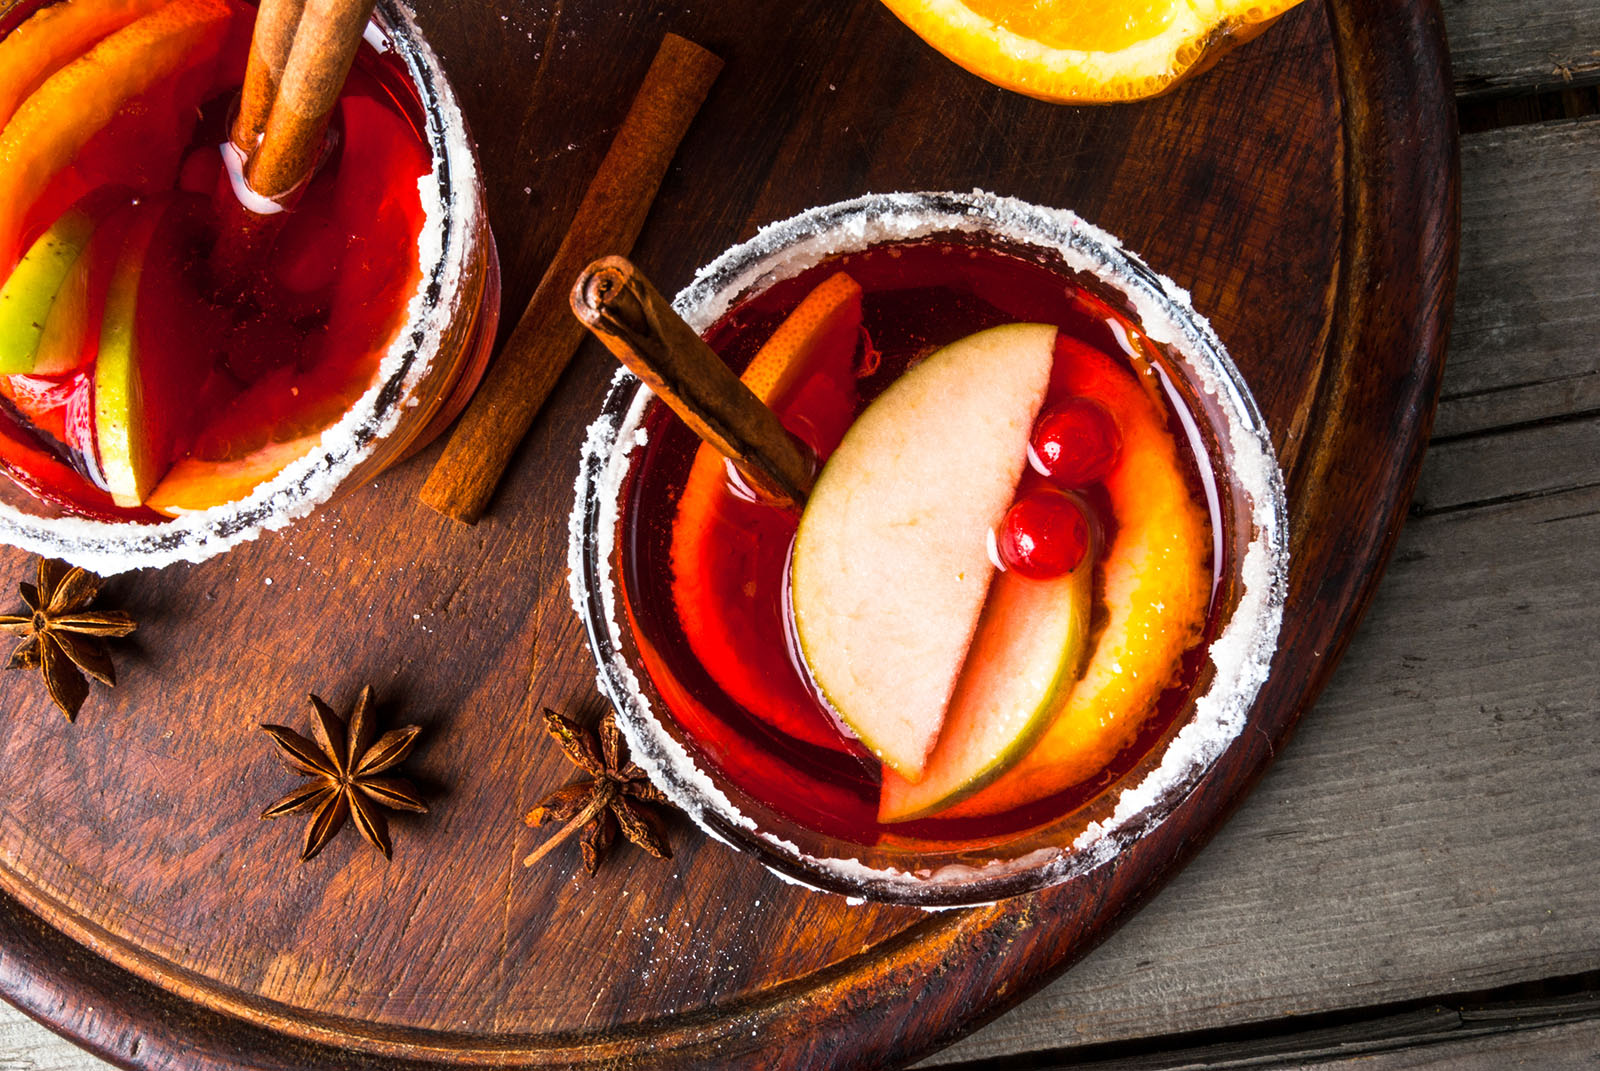 The sangria in the winter version!